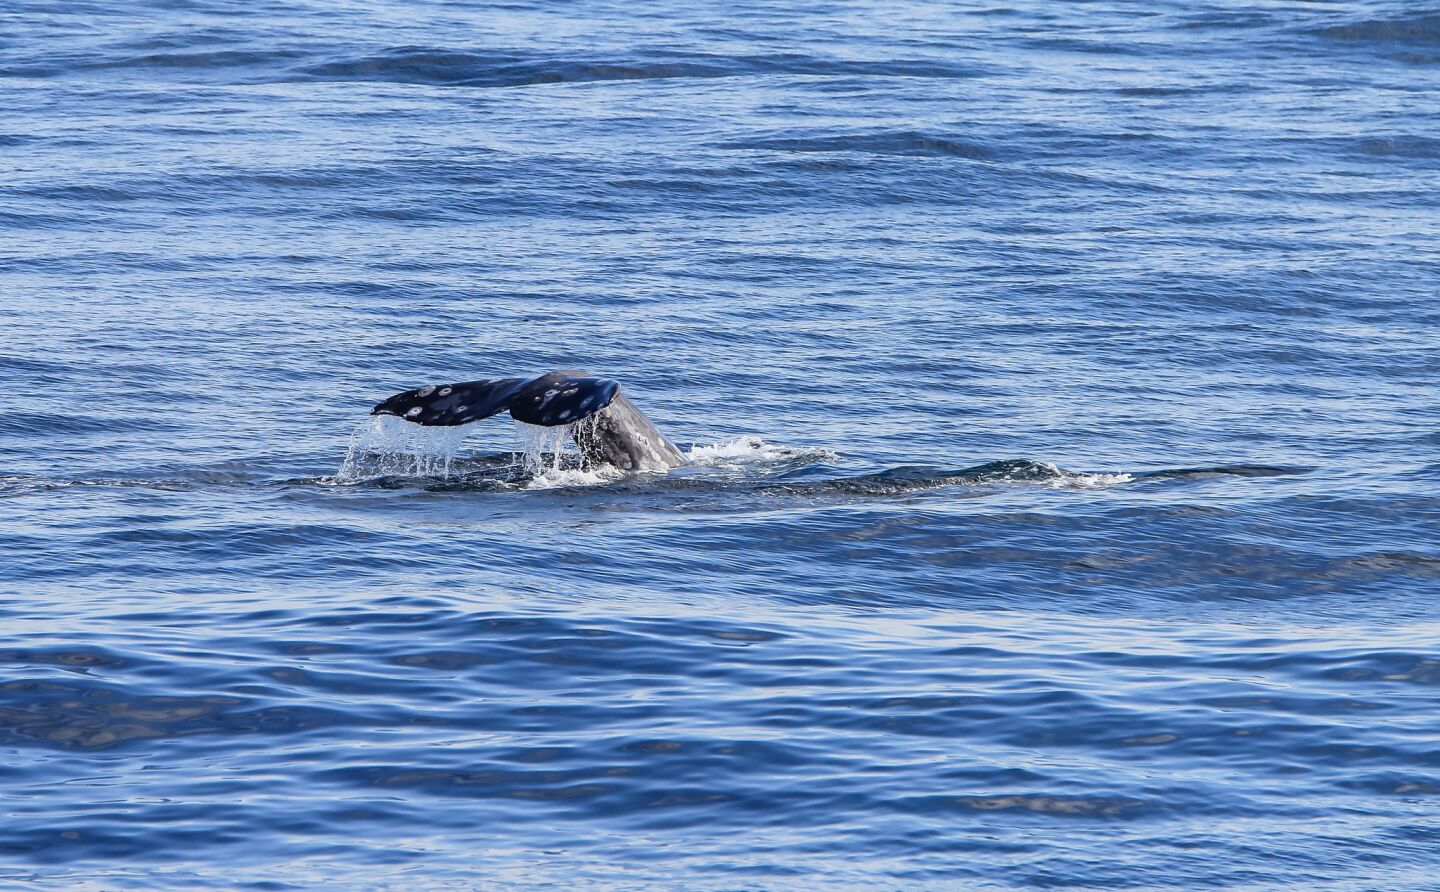 A fluke of an Eastern Pacific gray whale.